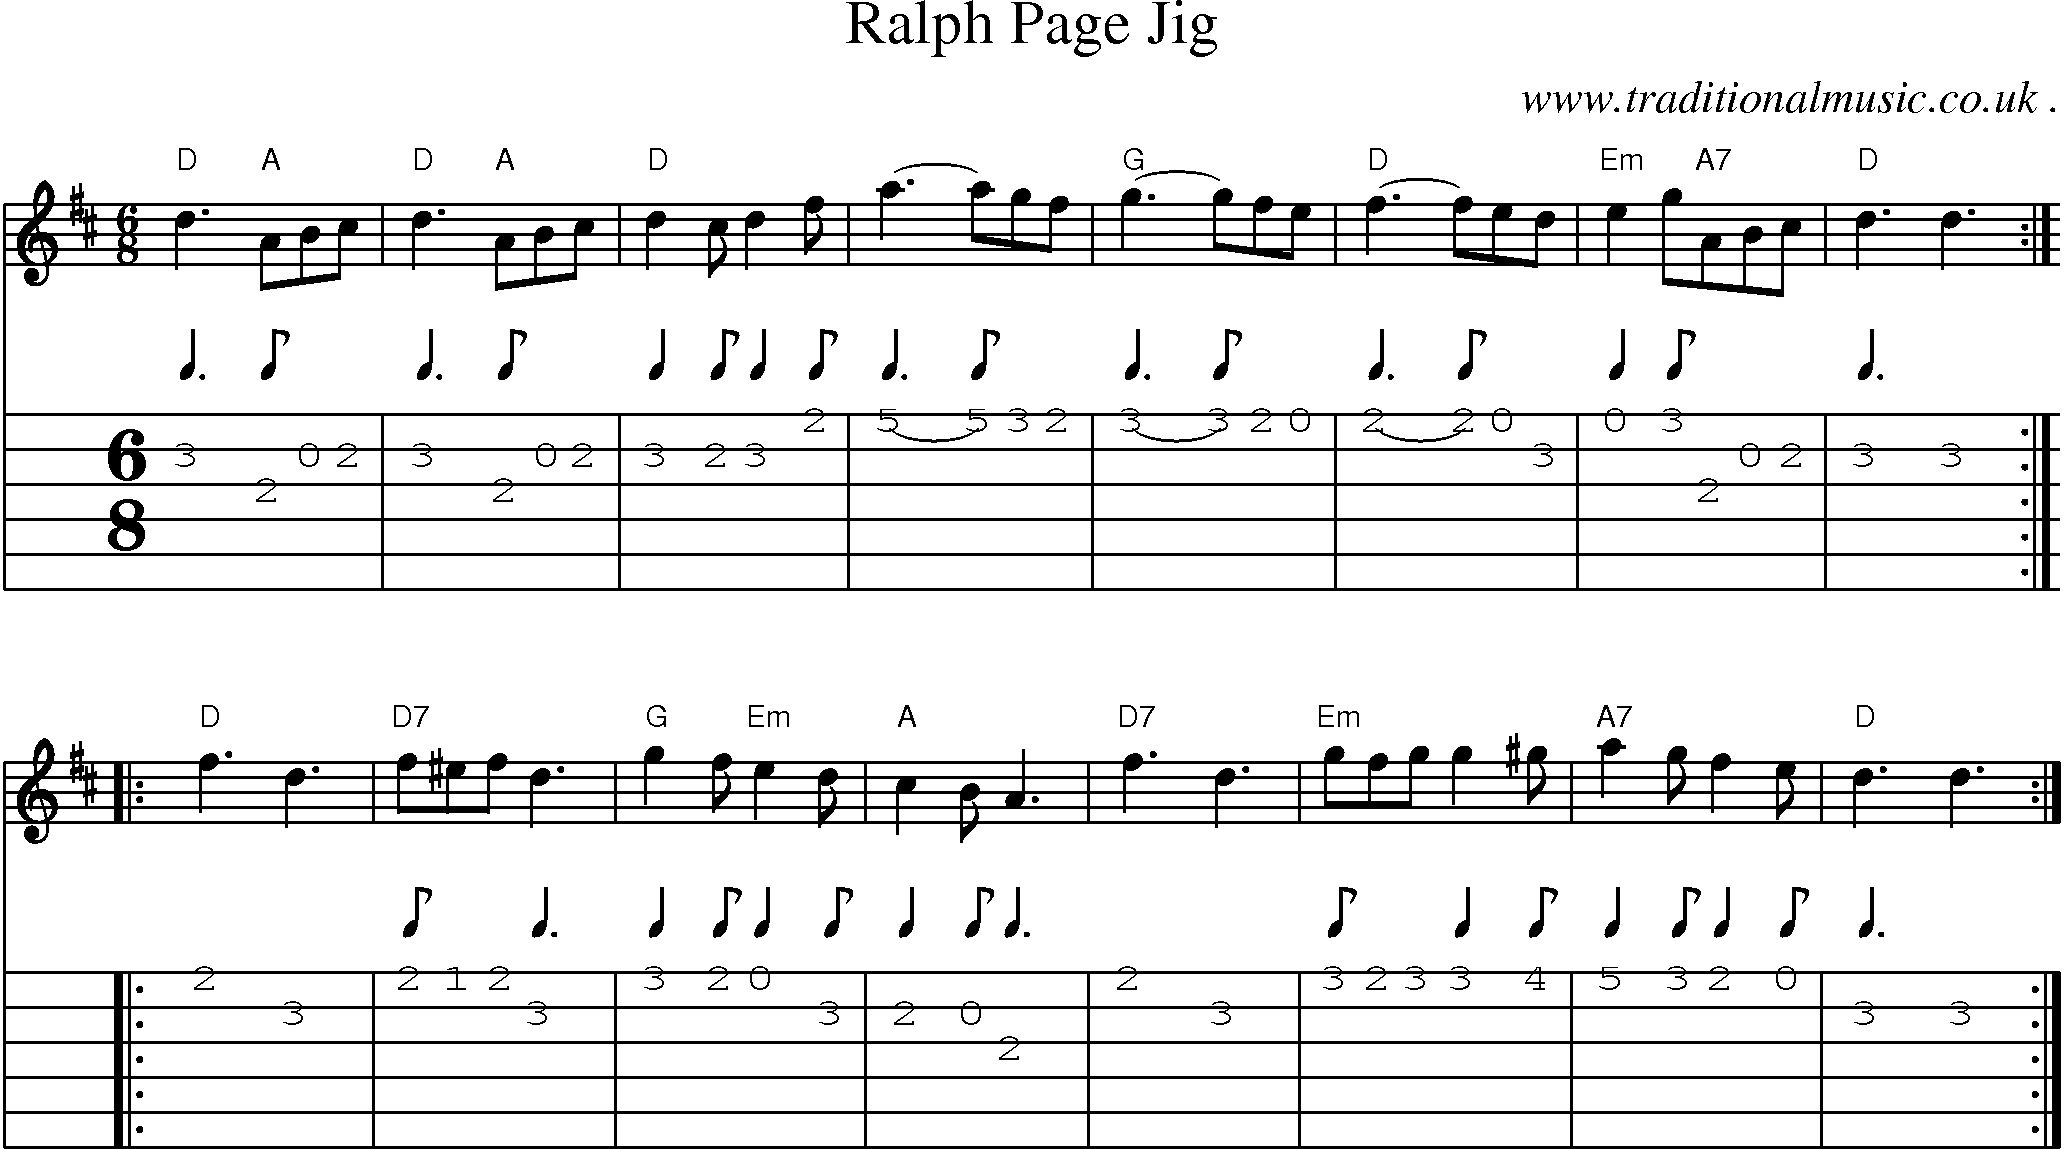 Sheet-Music and Guitar Tabs for Ralph Page Jig